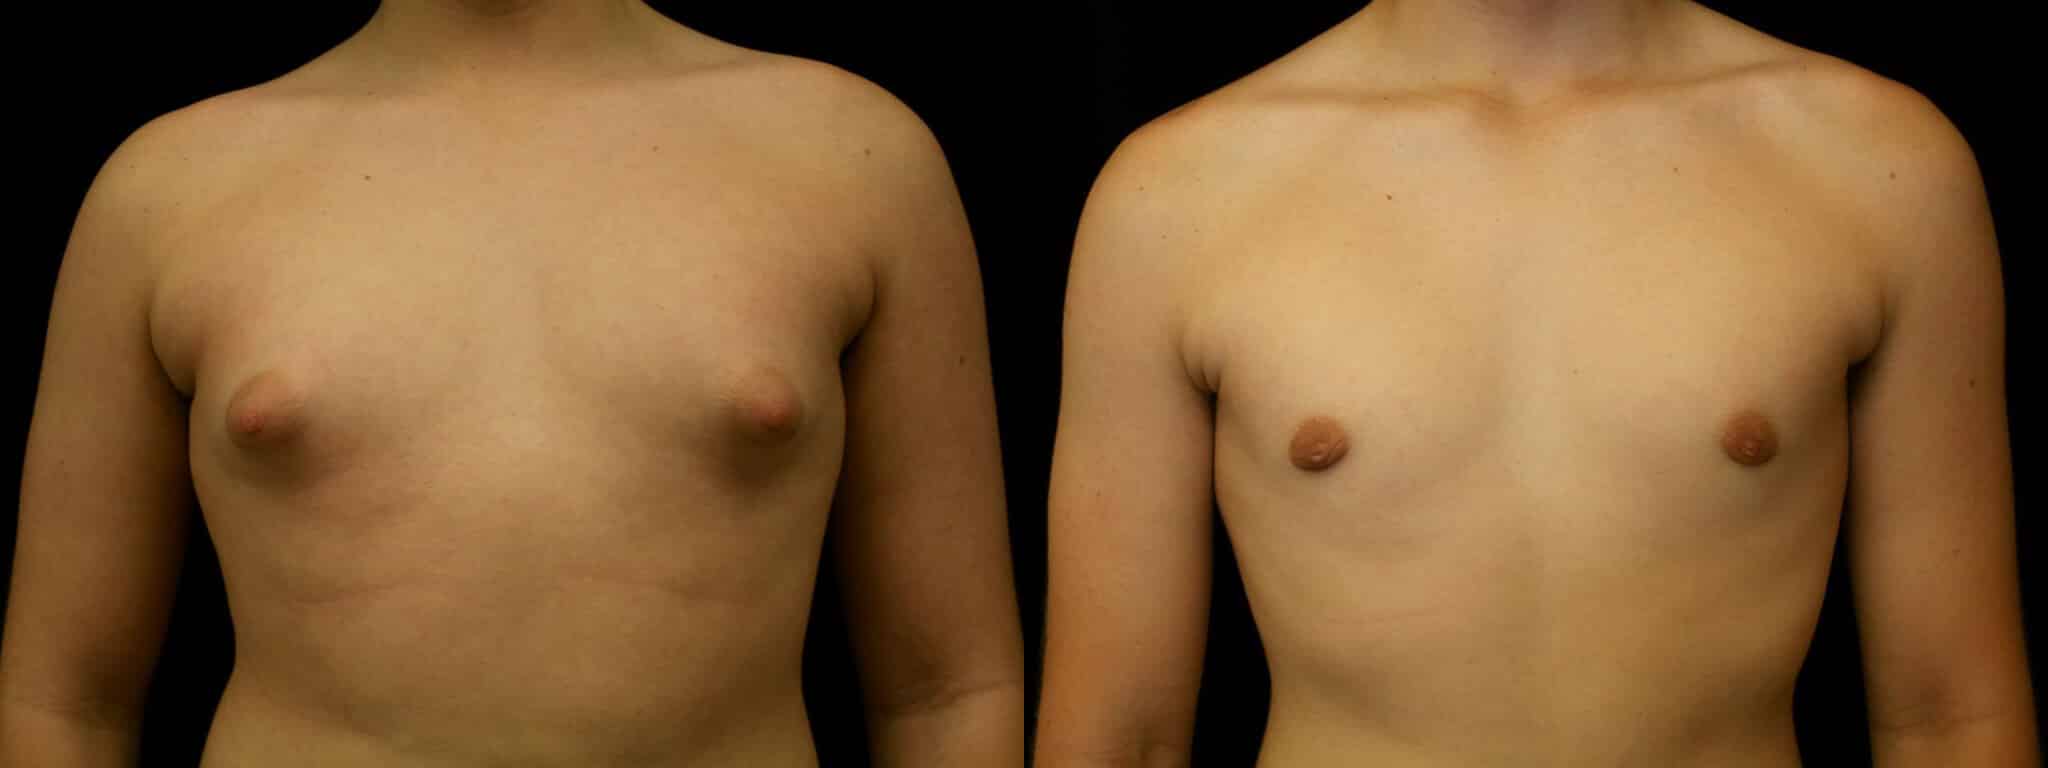 Gynecomastia Patient 12 Before & After